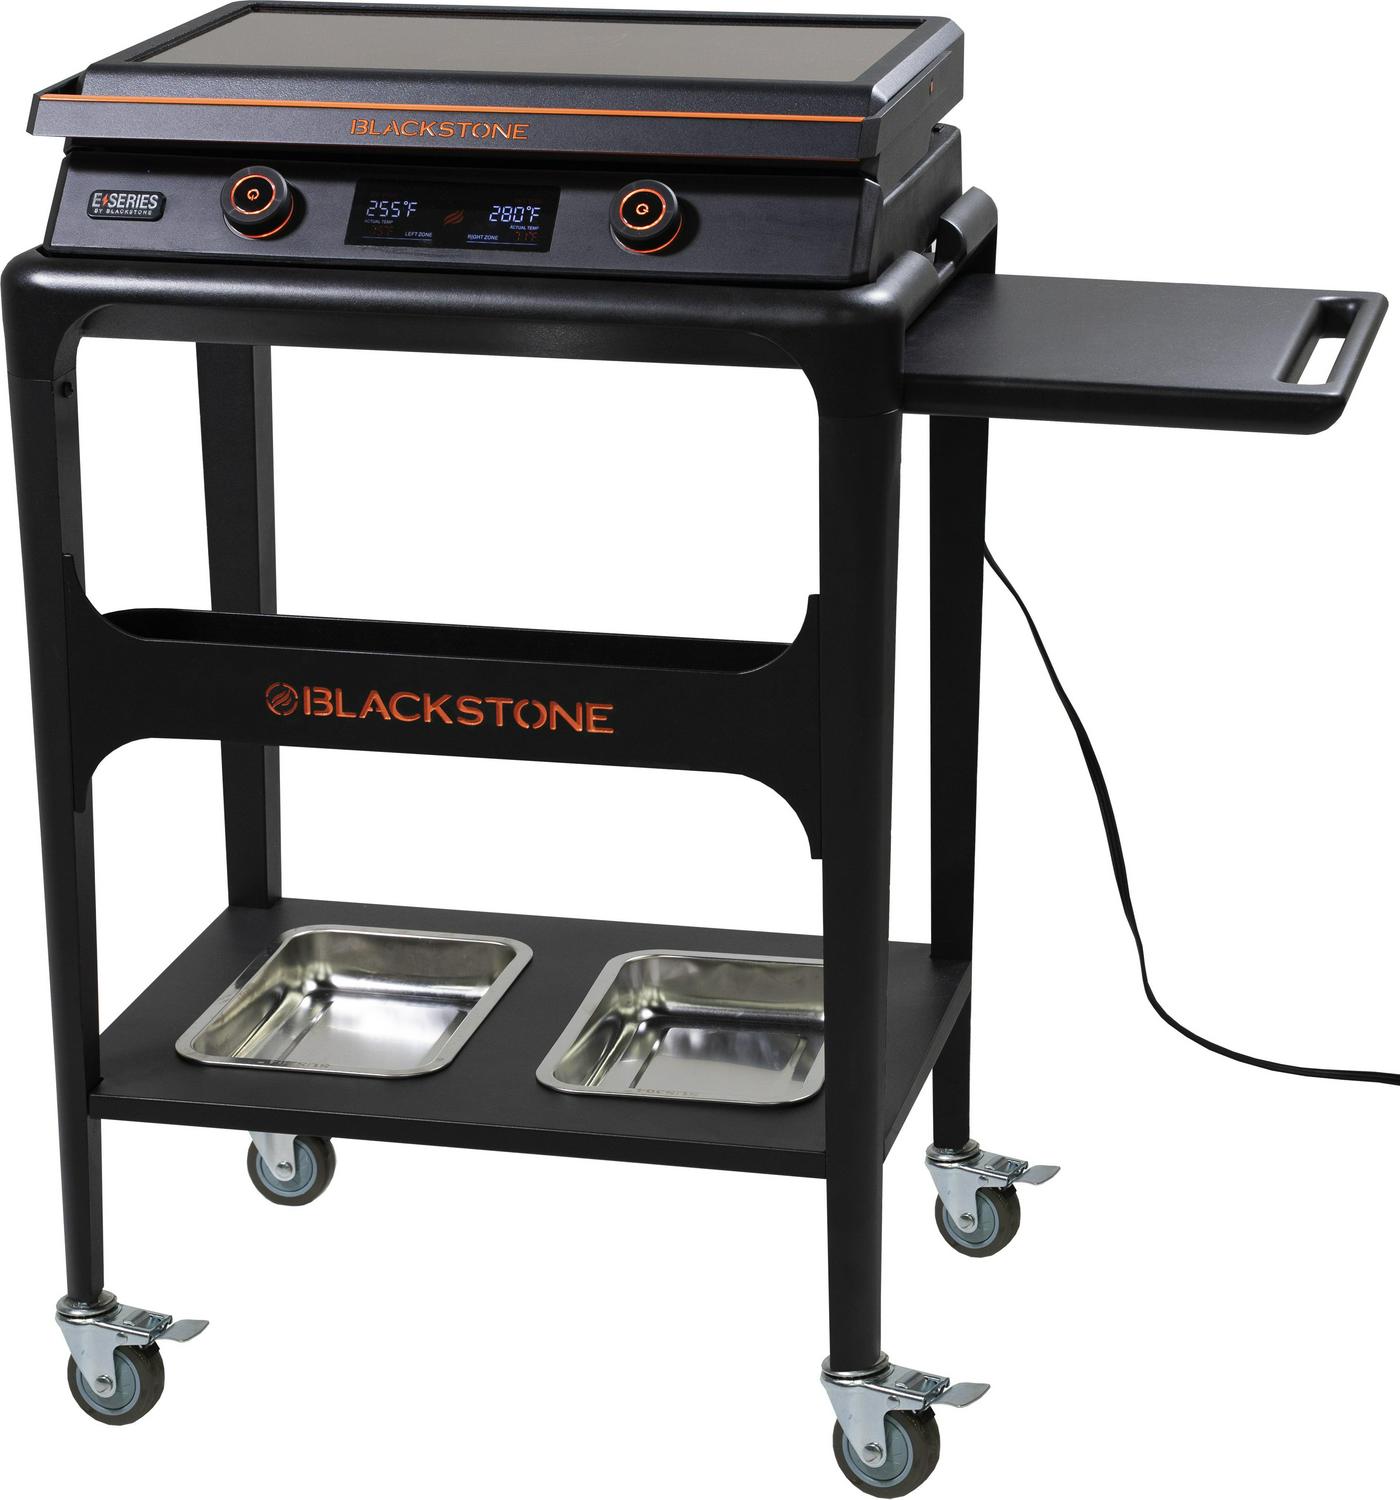 Blackstone E-Series 17 Electric Tabletop Griddle with Hood.NEW. USA